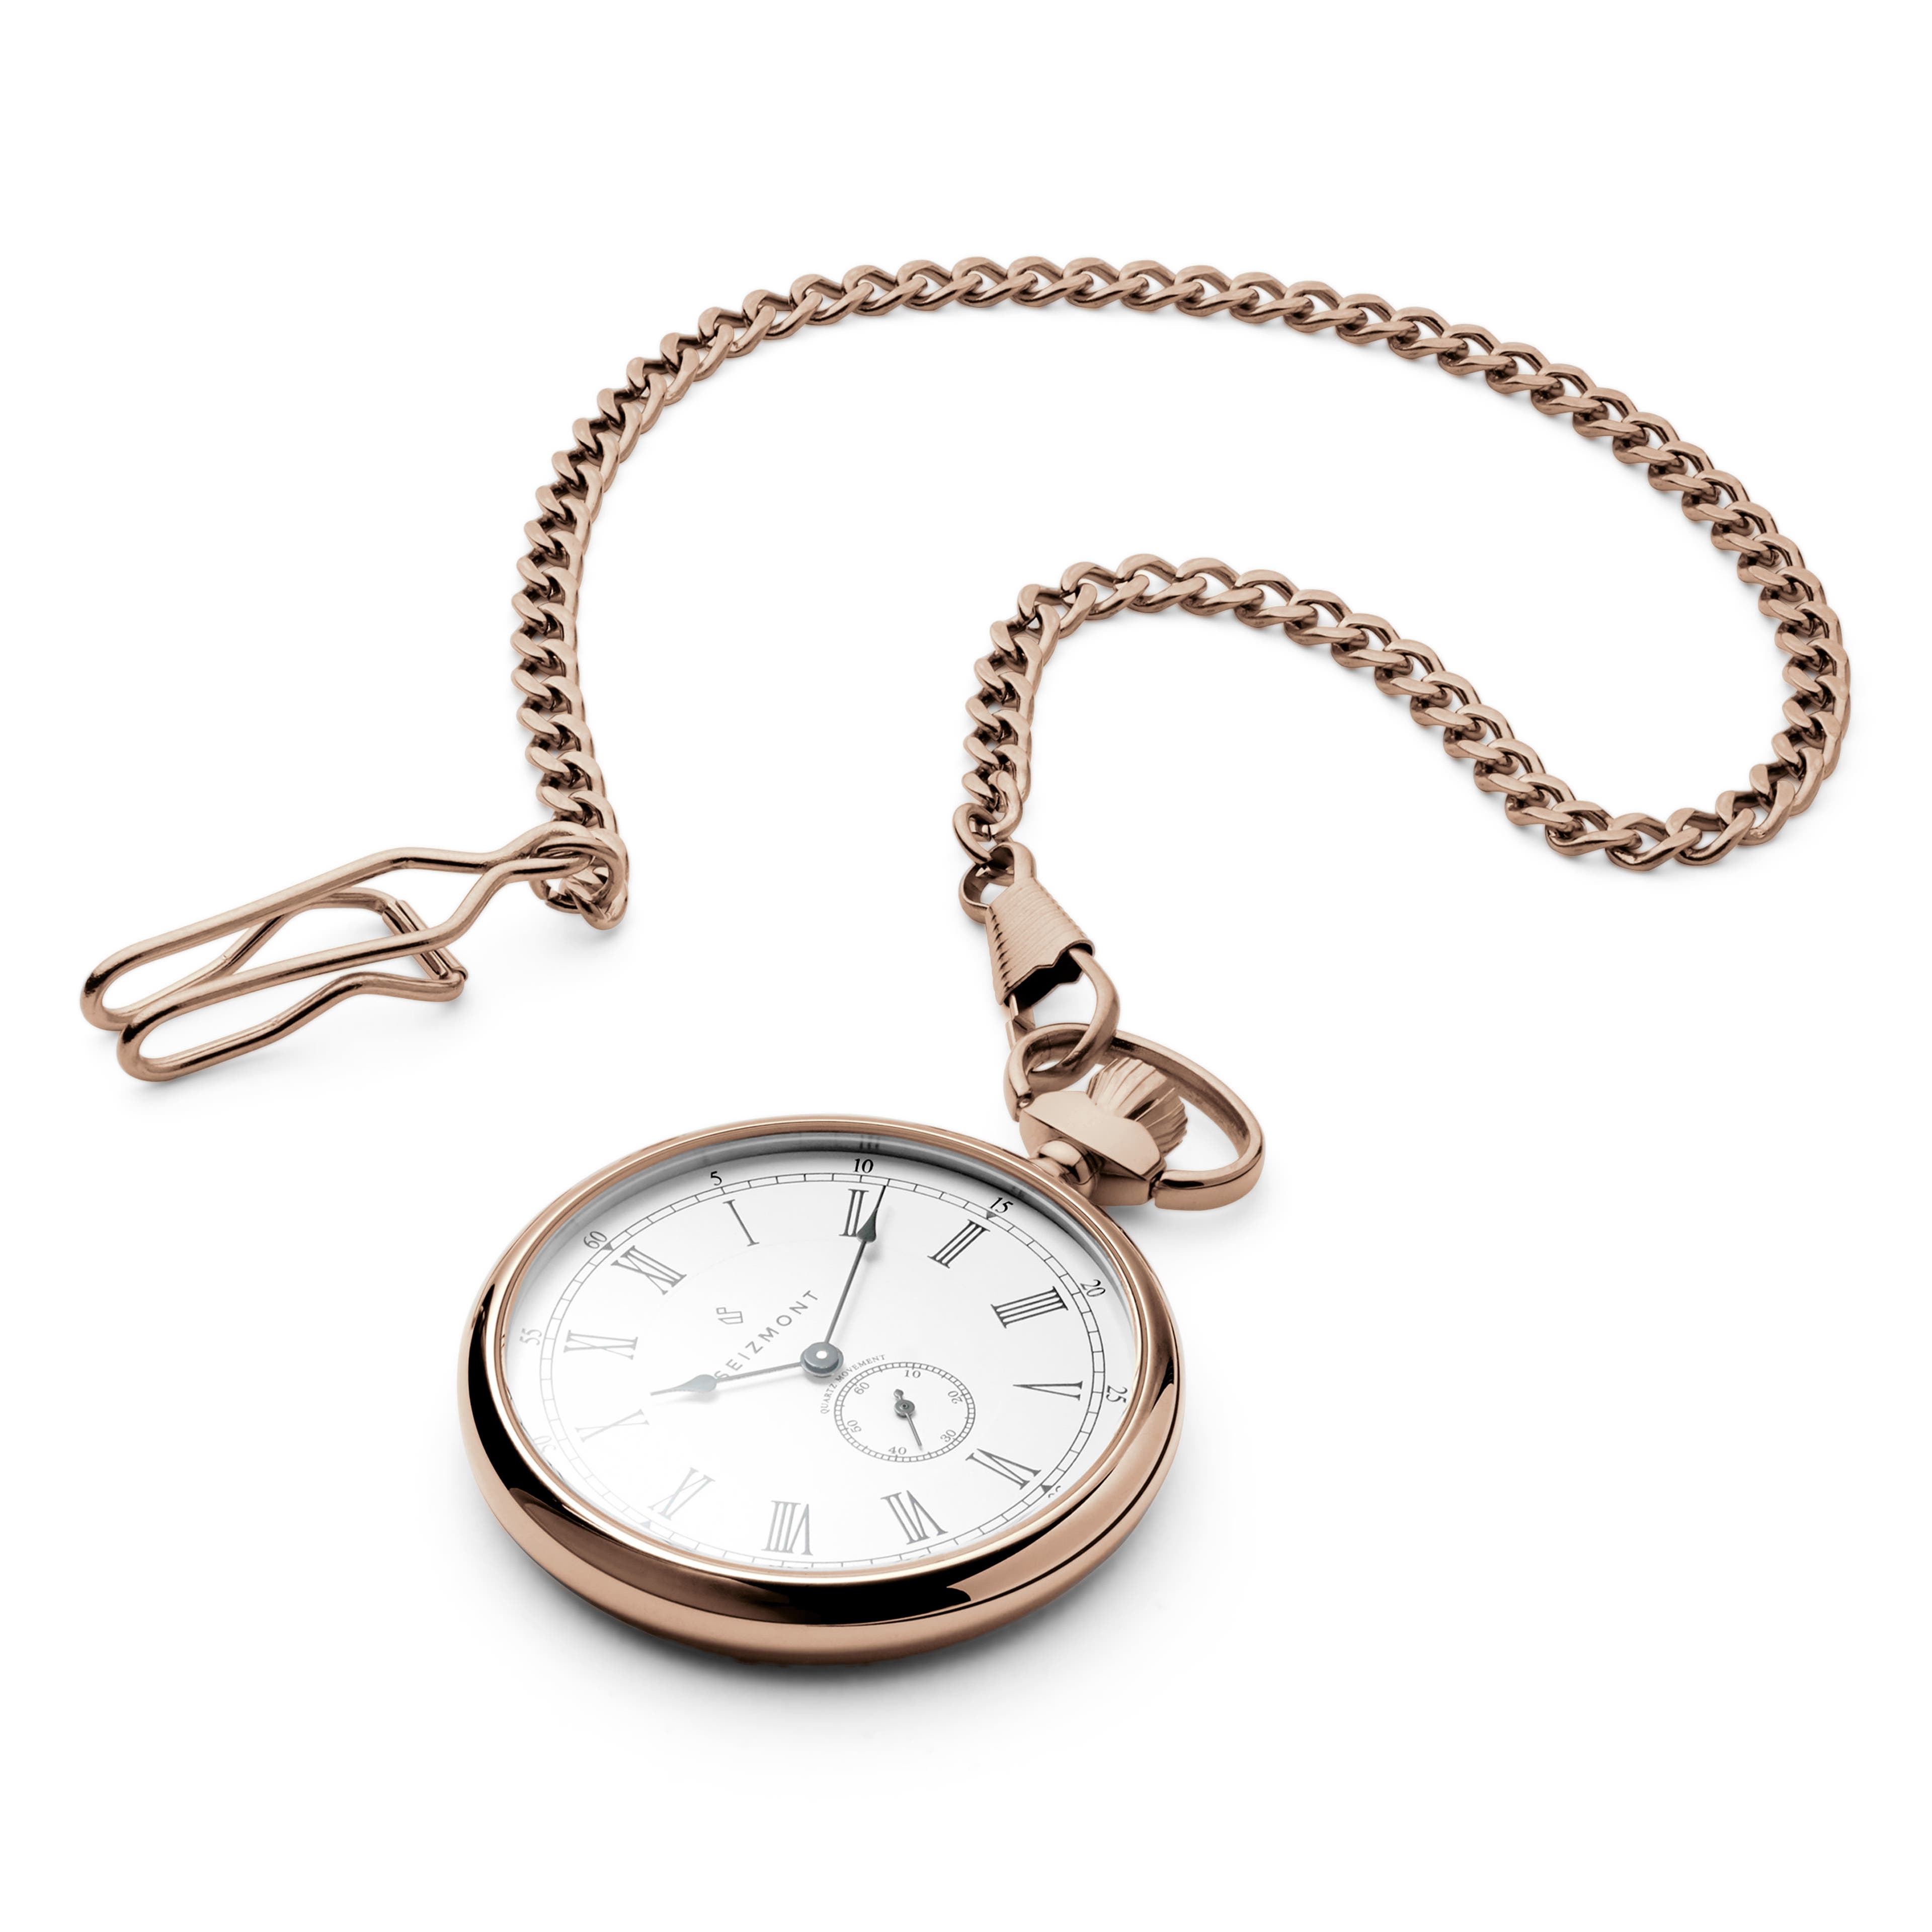 Peter Time Keeper Pocket Watch